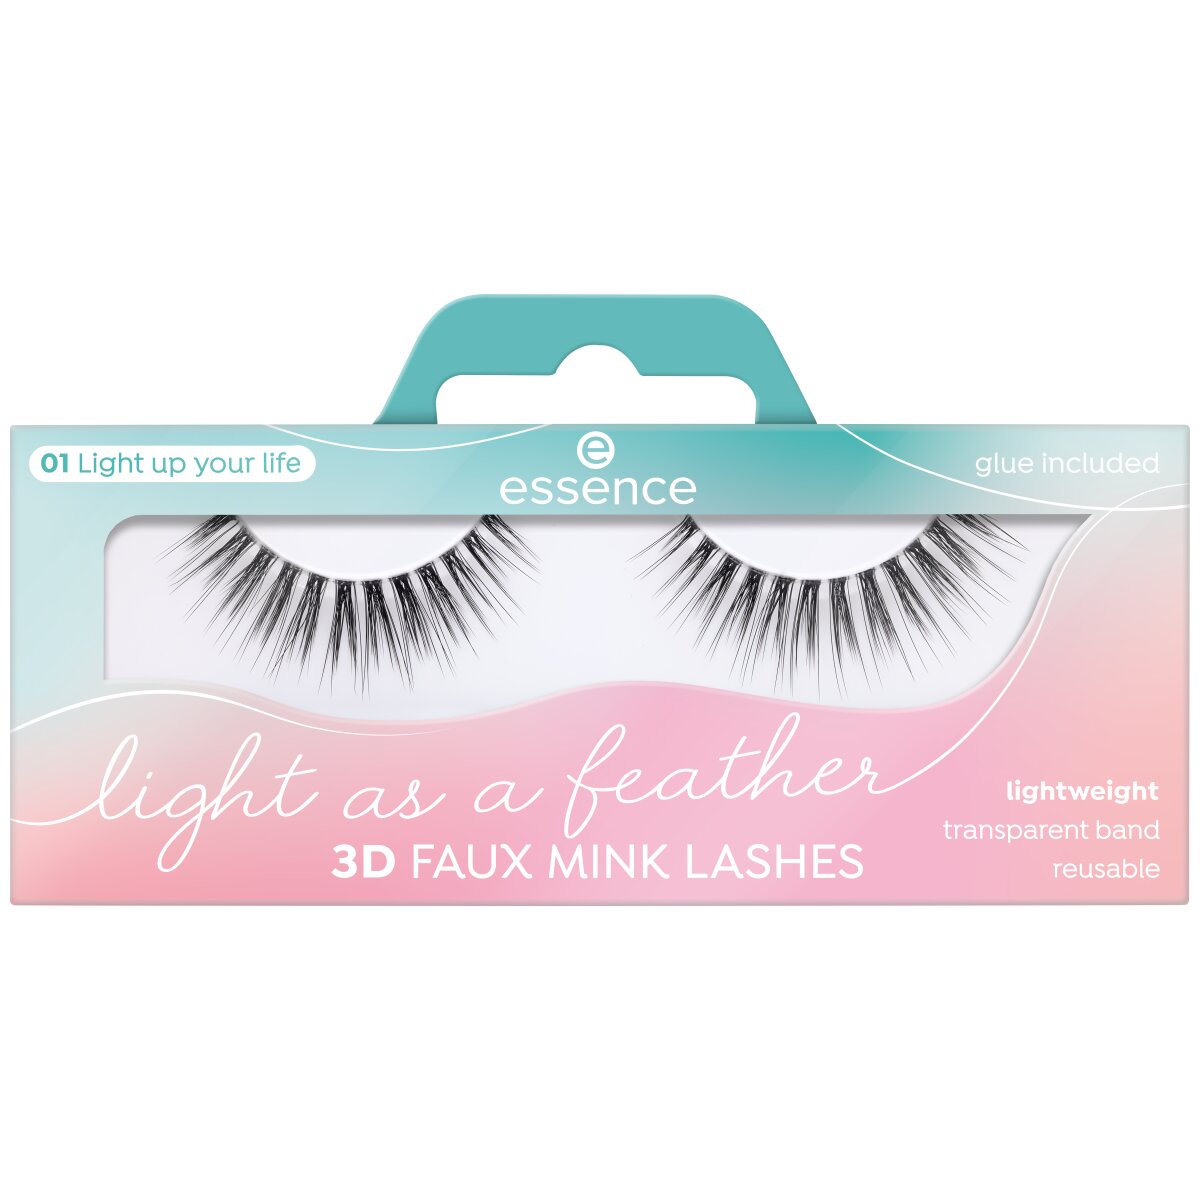 essence – of House Lashes Light As 3D Feather A Mink Faux Cosmetics